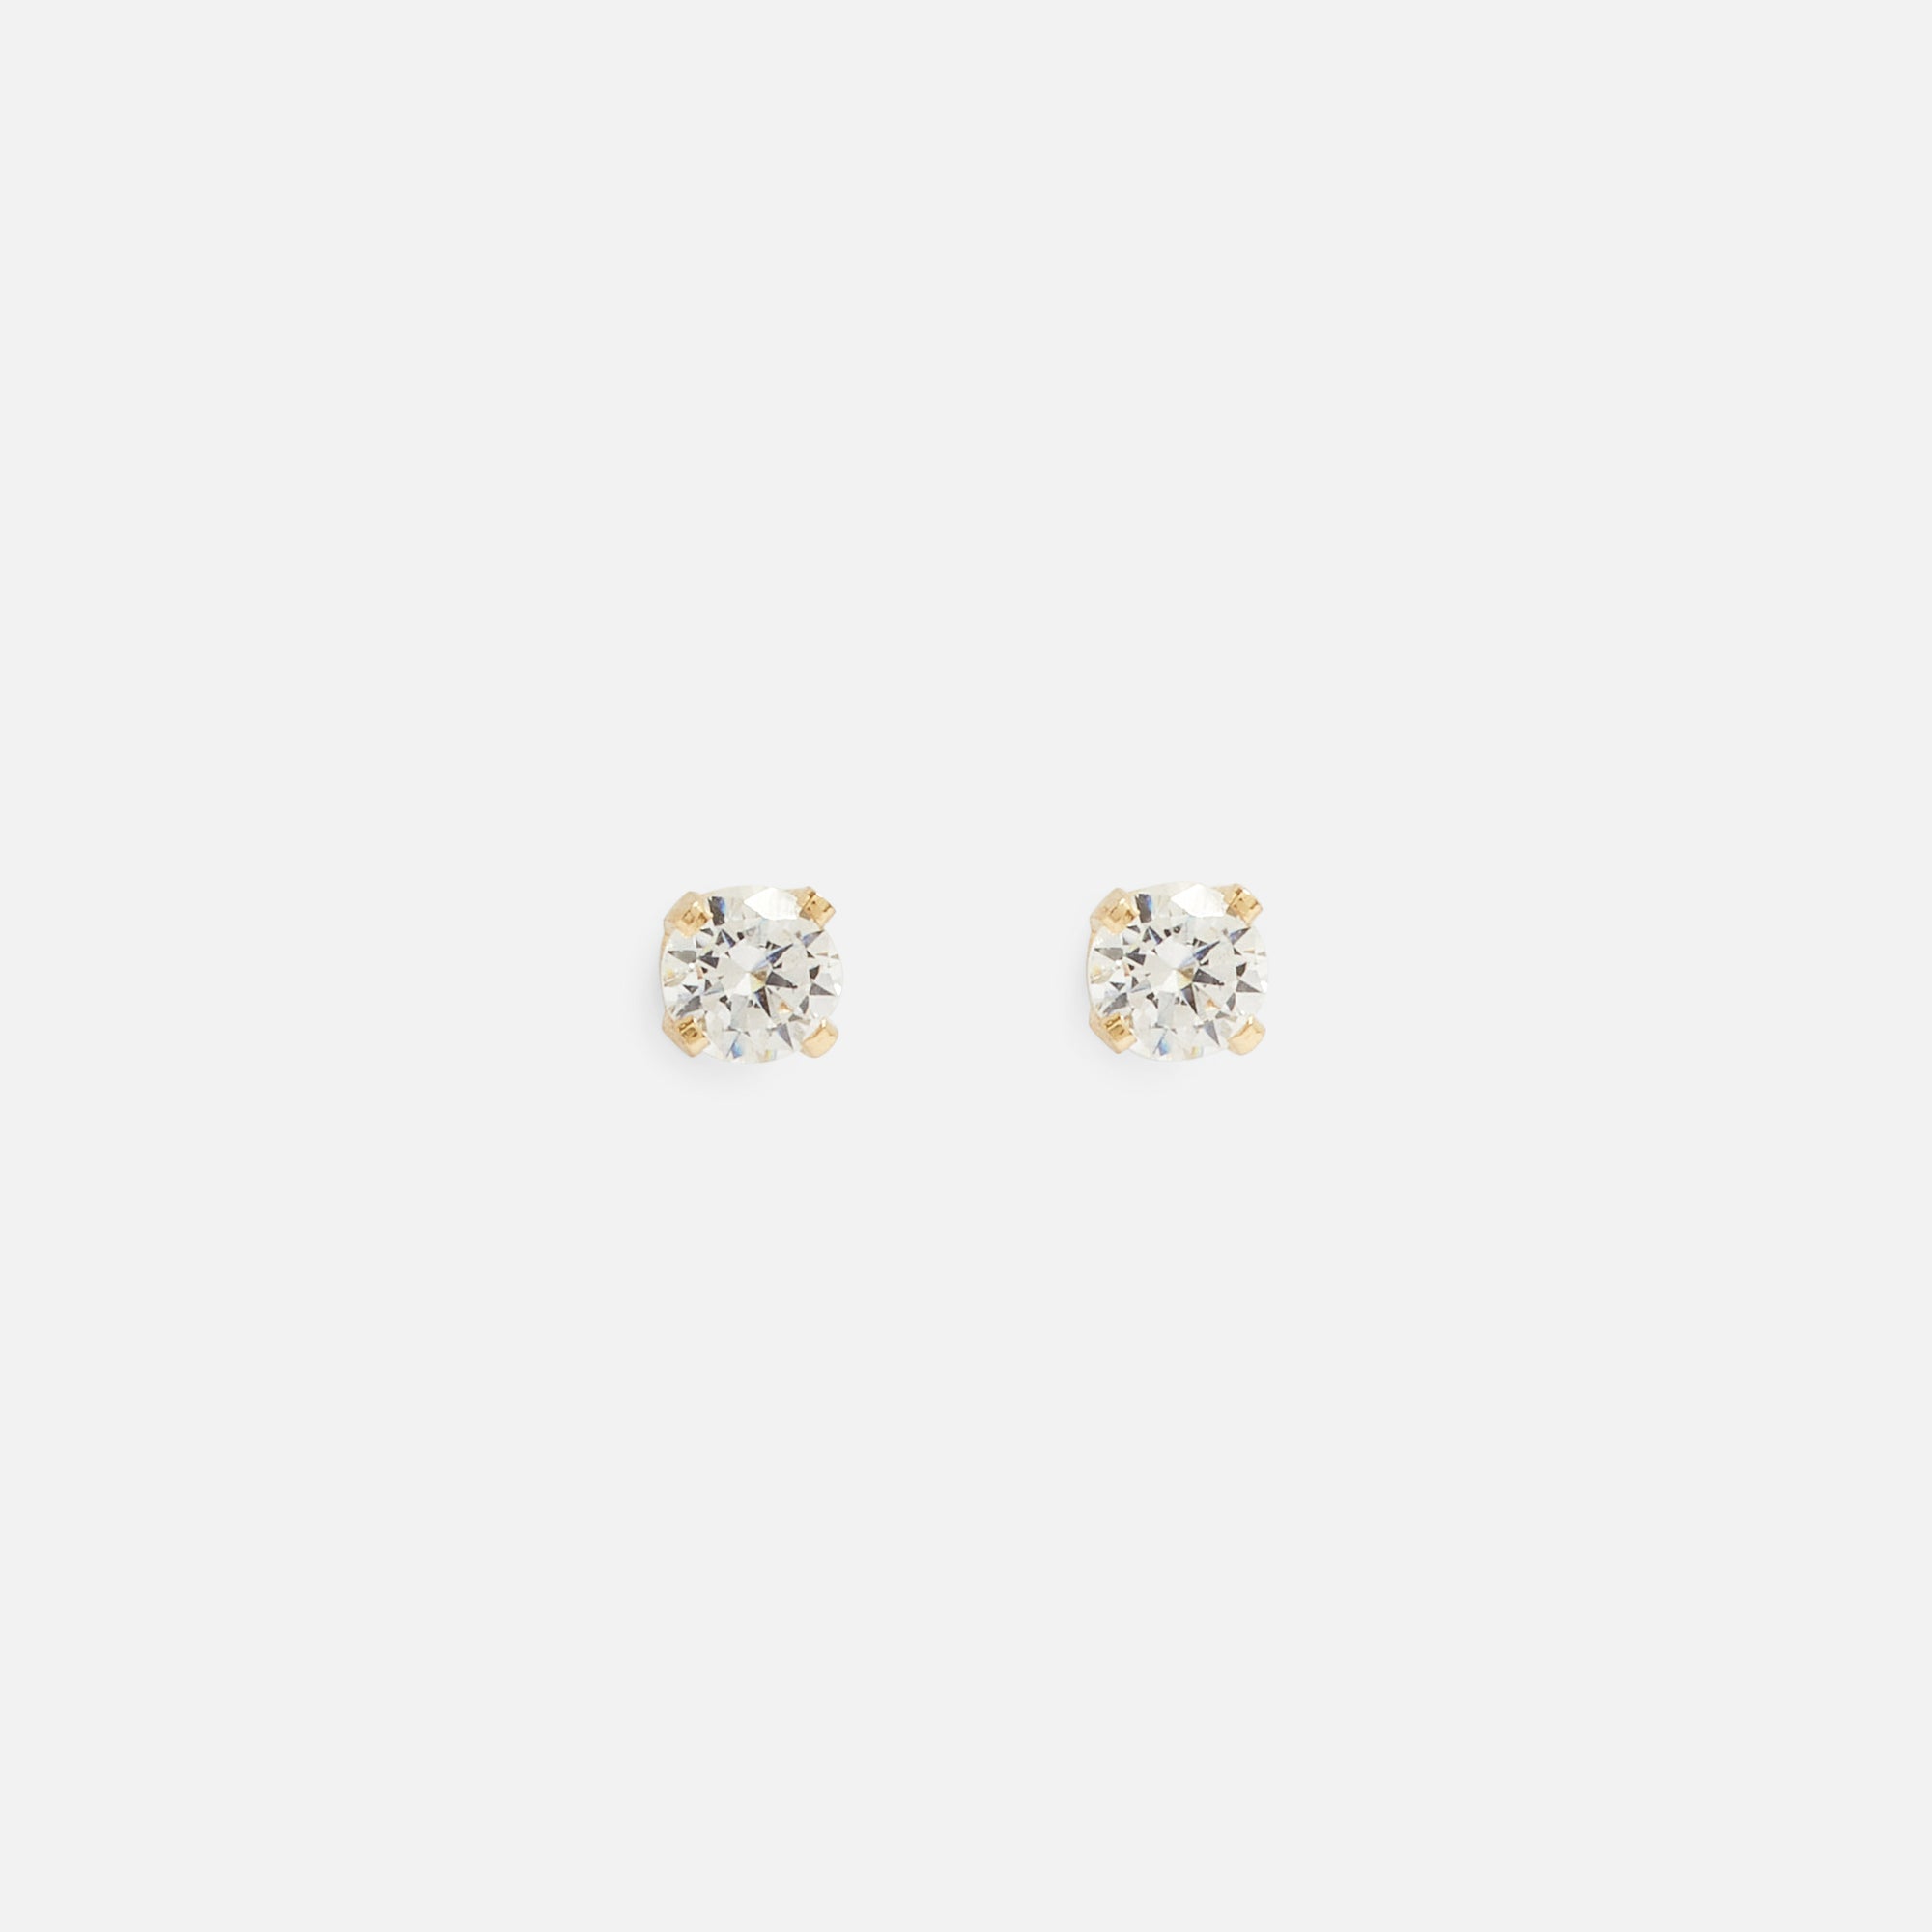 3 mm 10k yellow gold earrings with cubic zirconia 